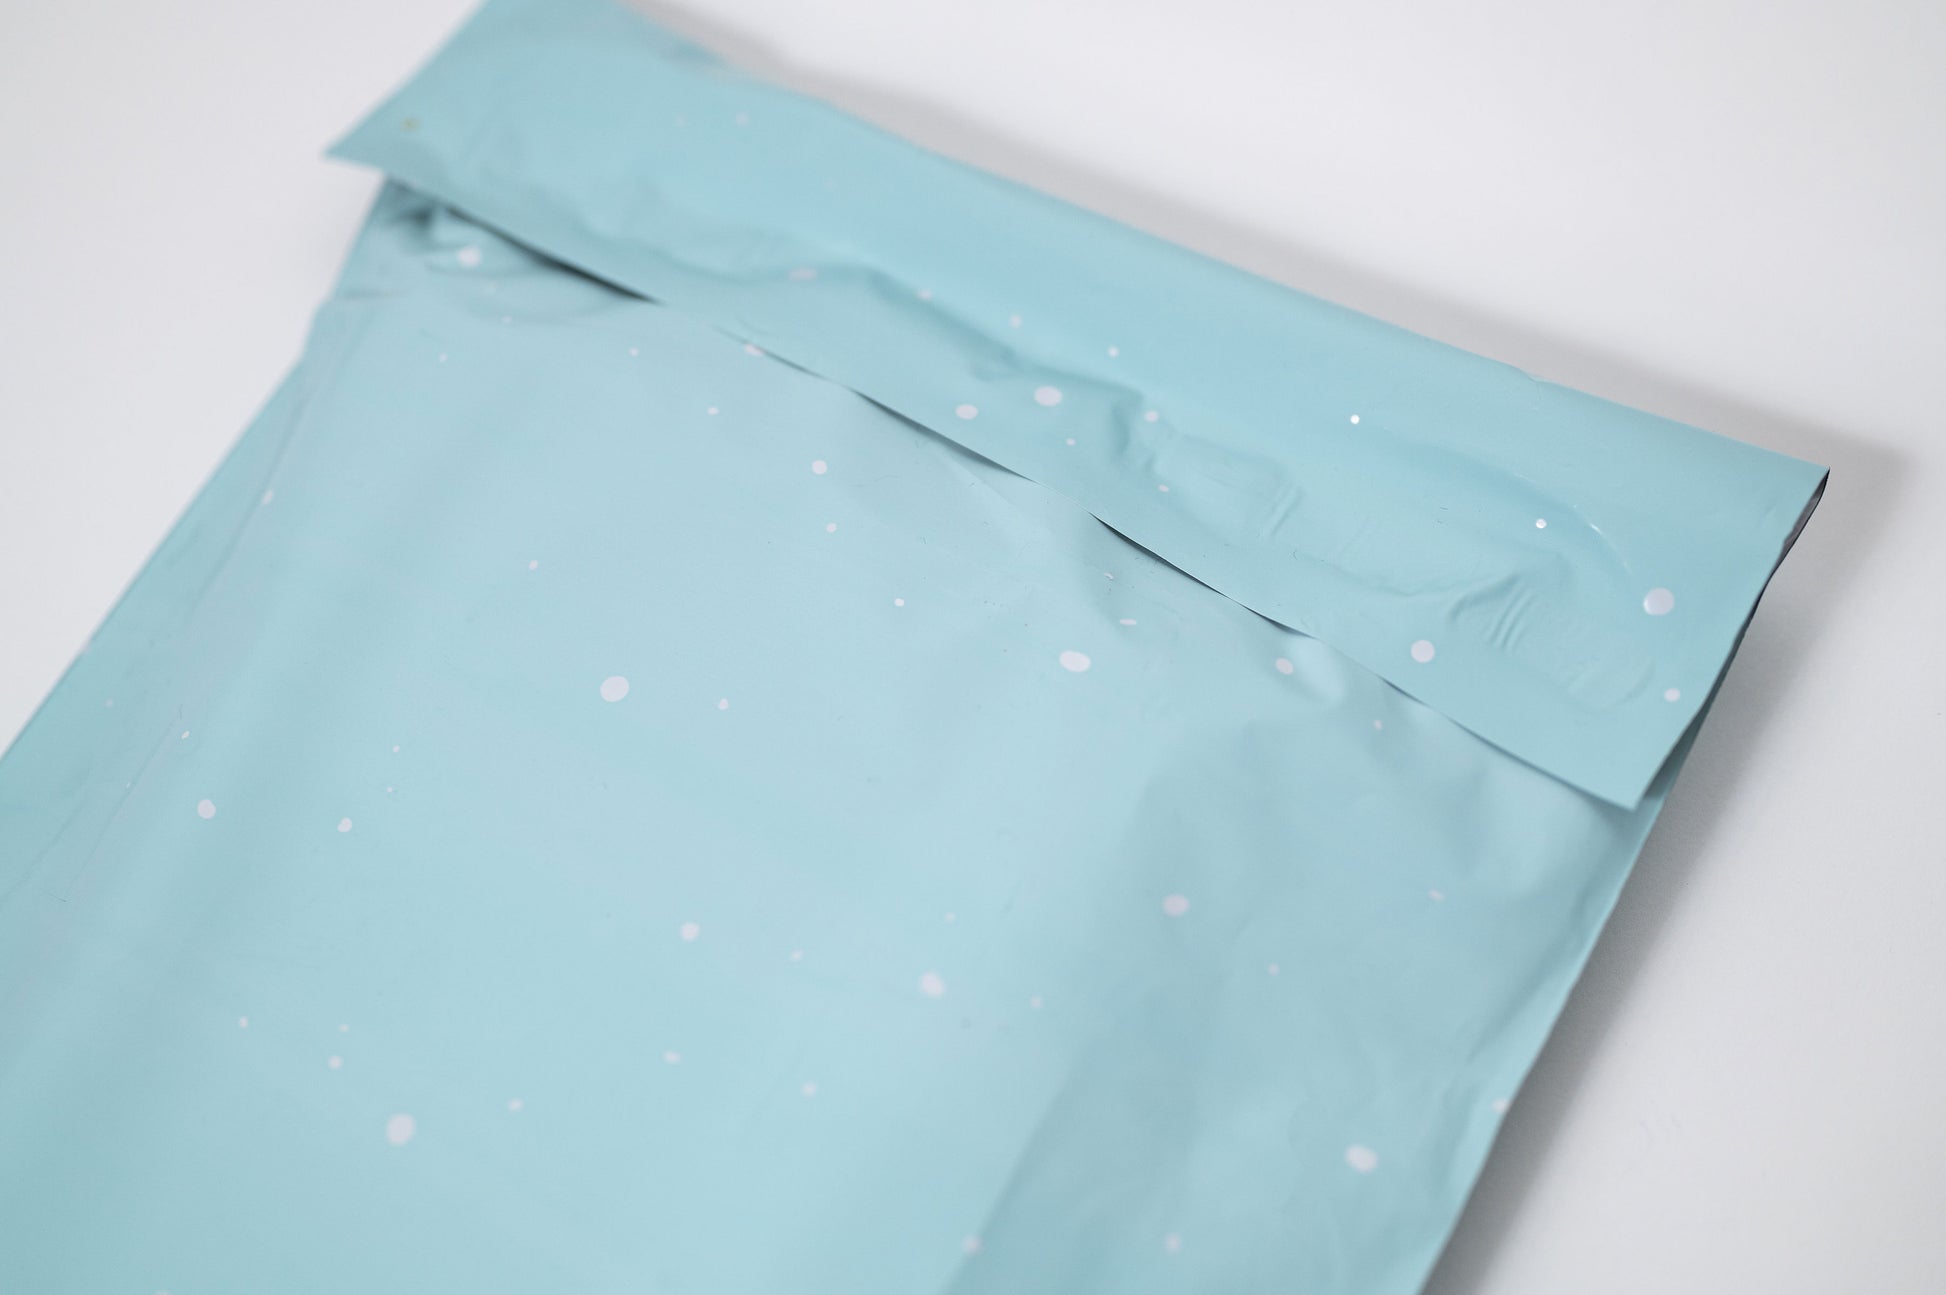 A Starry Baby Blue Biodegradable Mailer 10" x 13" with white snowflakes on it, made from recyclable materials, by impack.co.